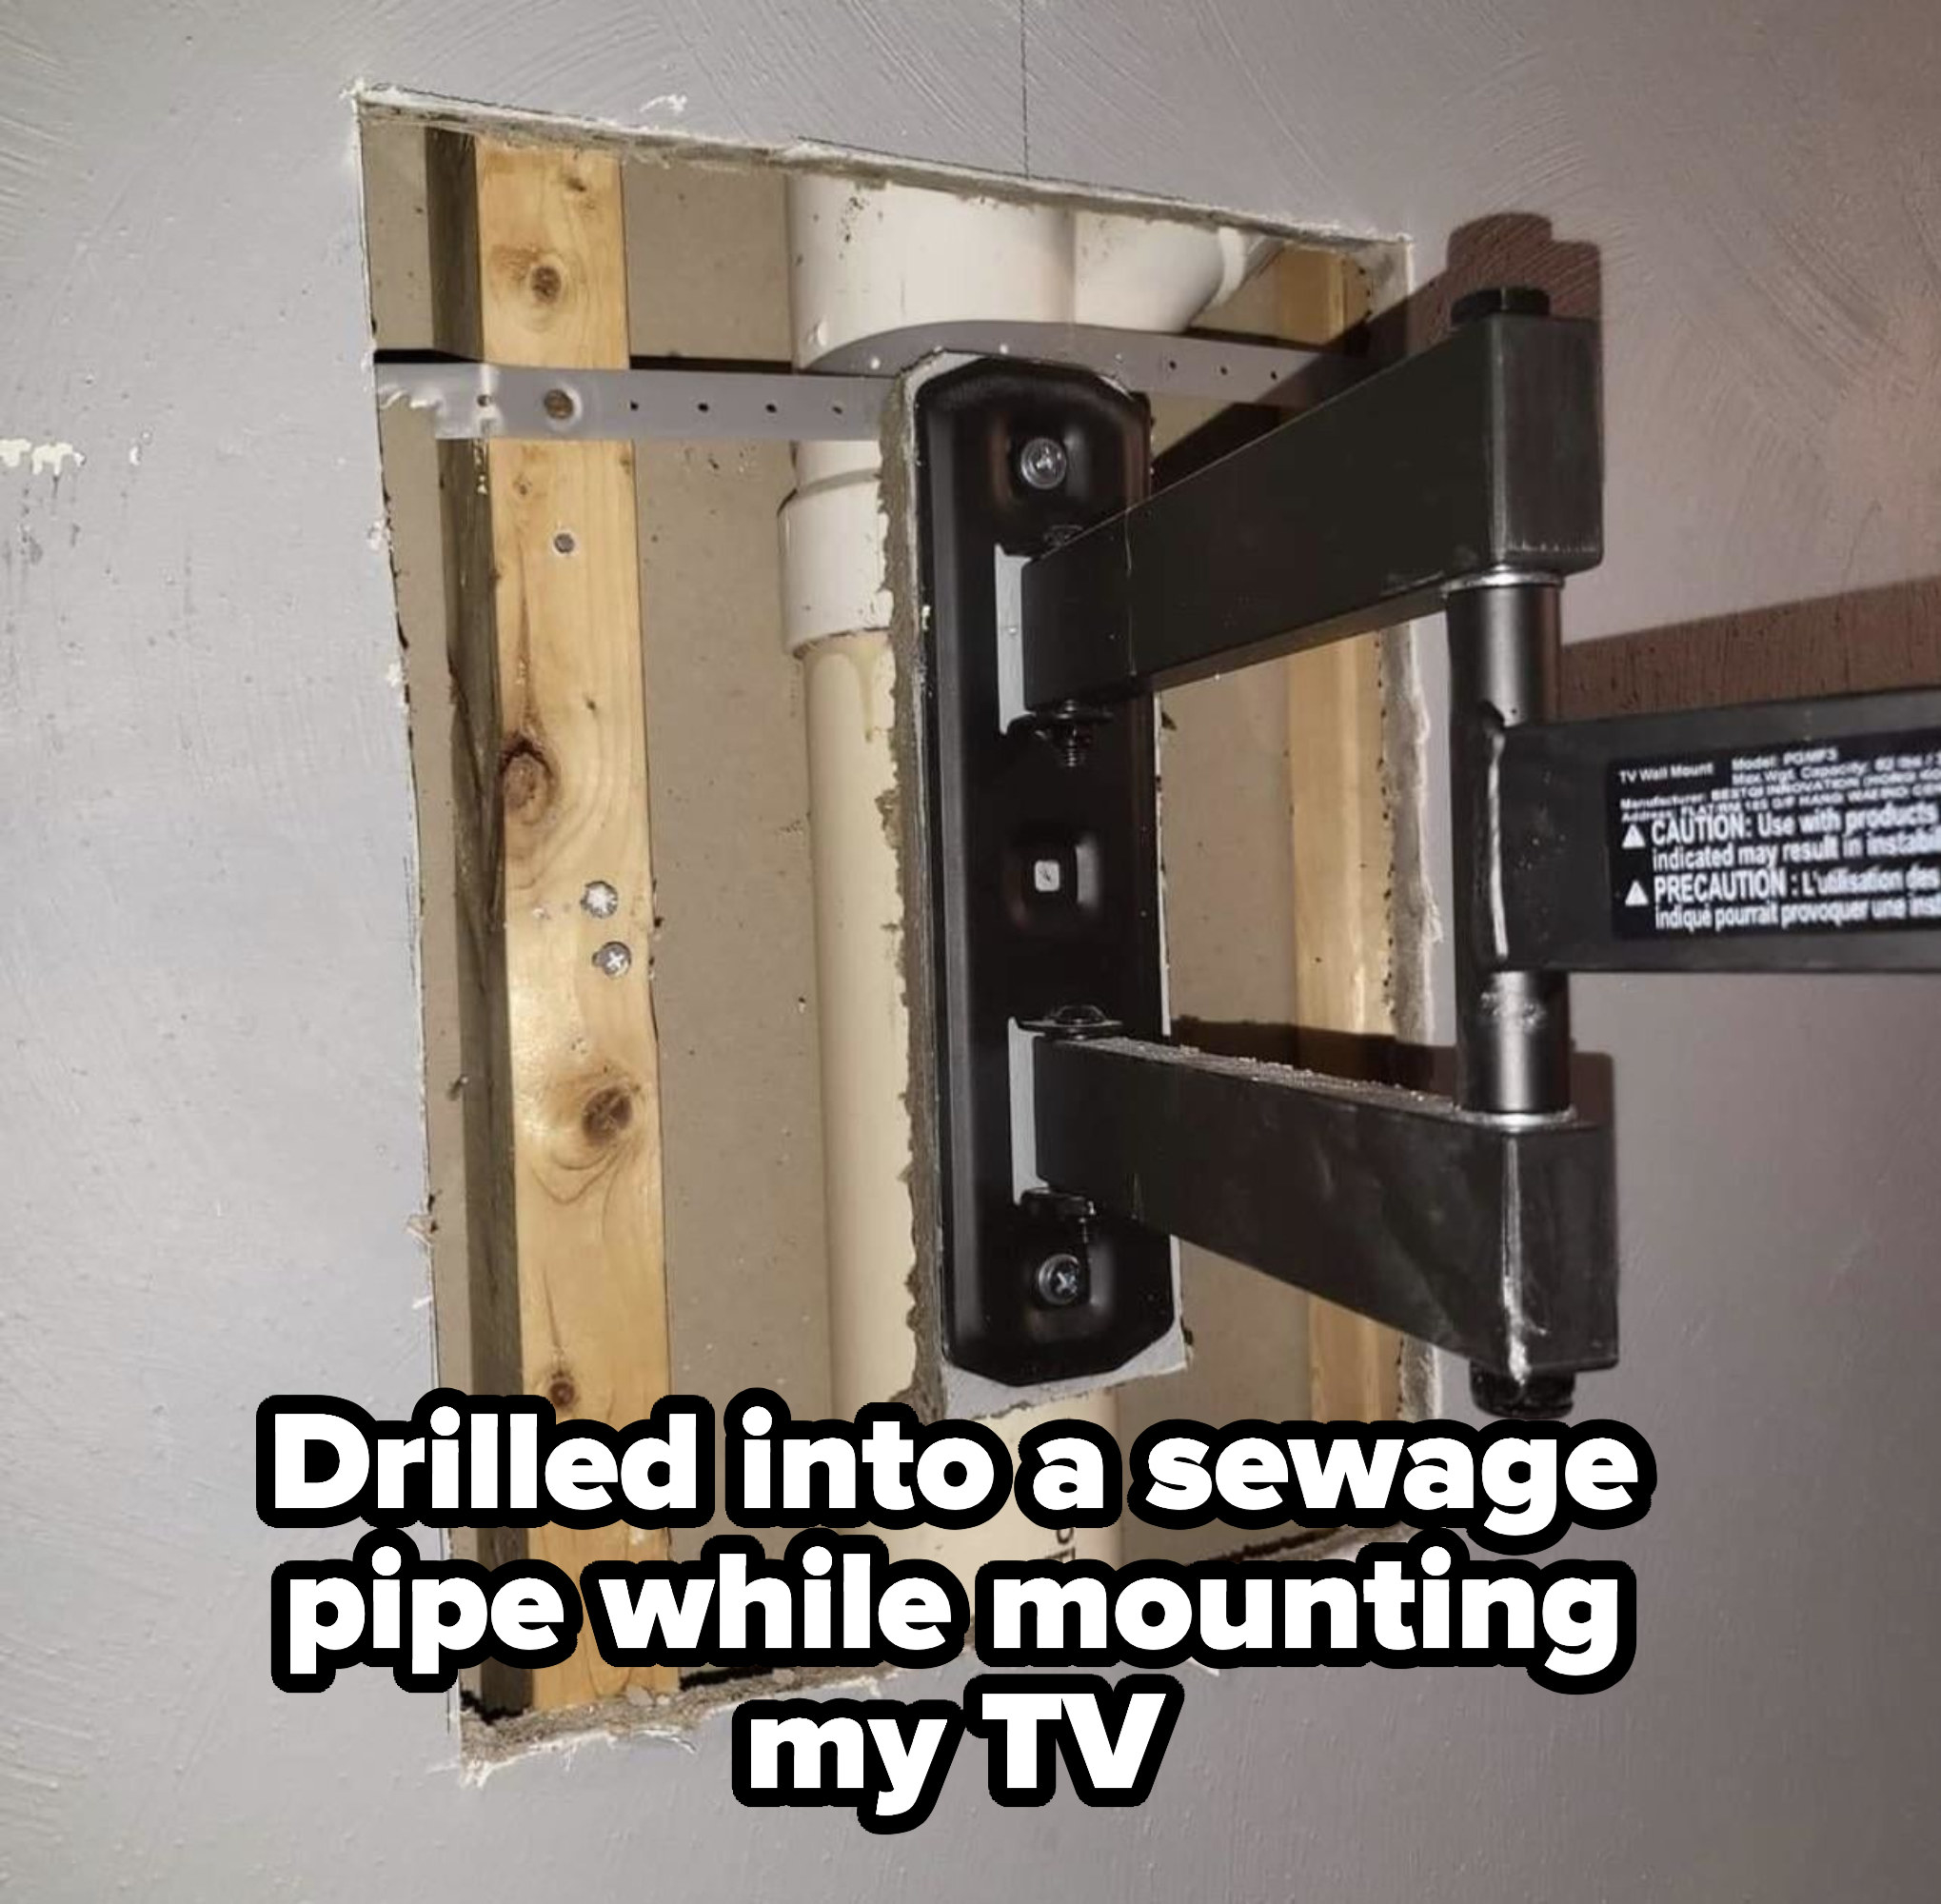 &quot;Drilled into a sewage pipe while mounting my TV&quot;